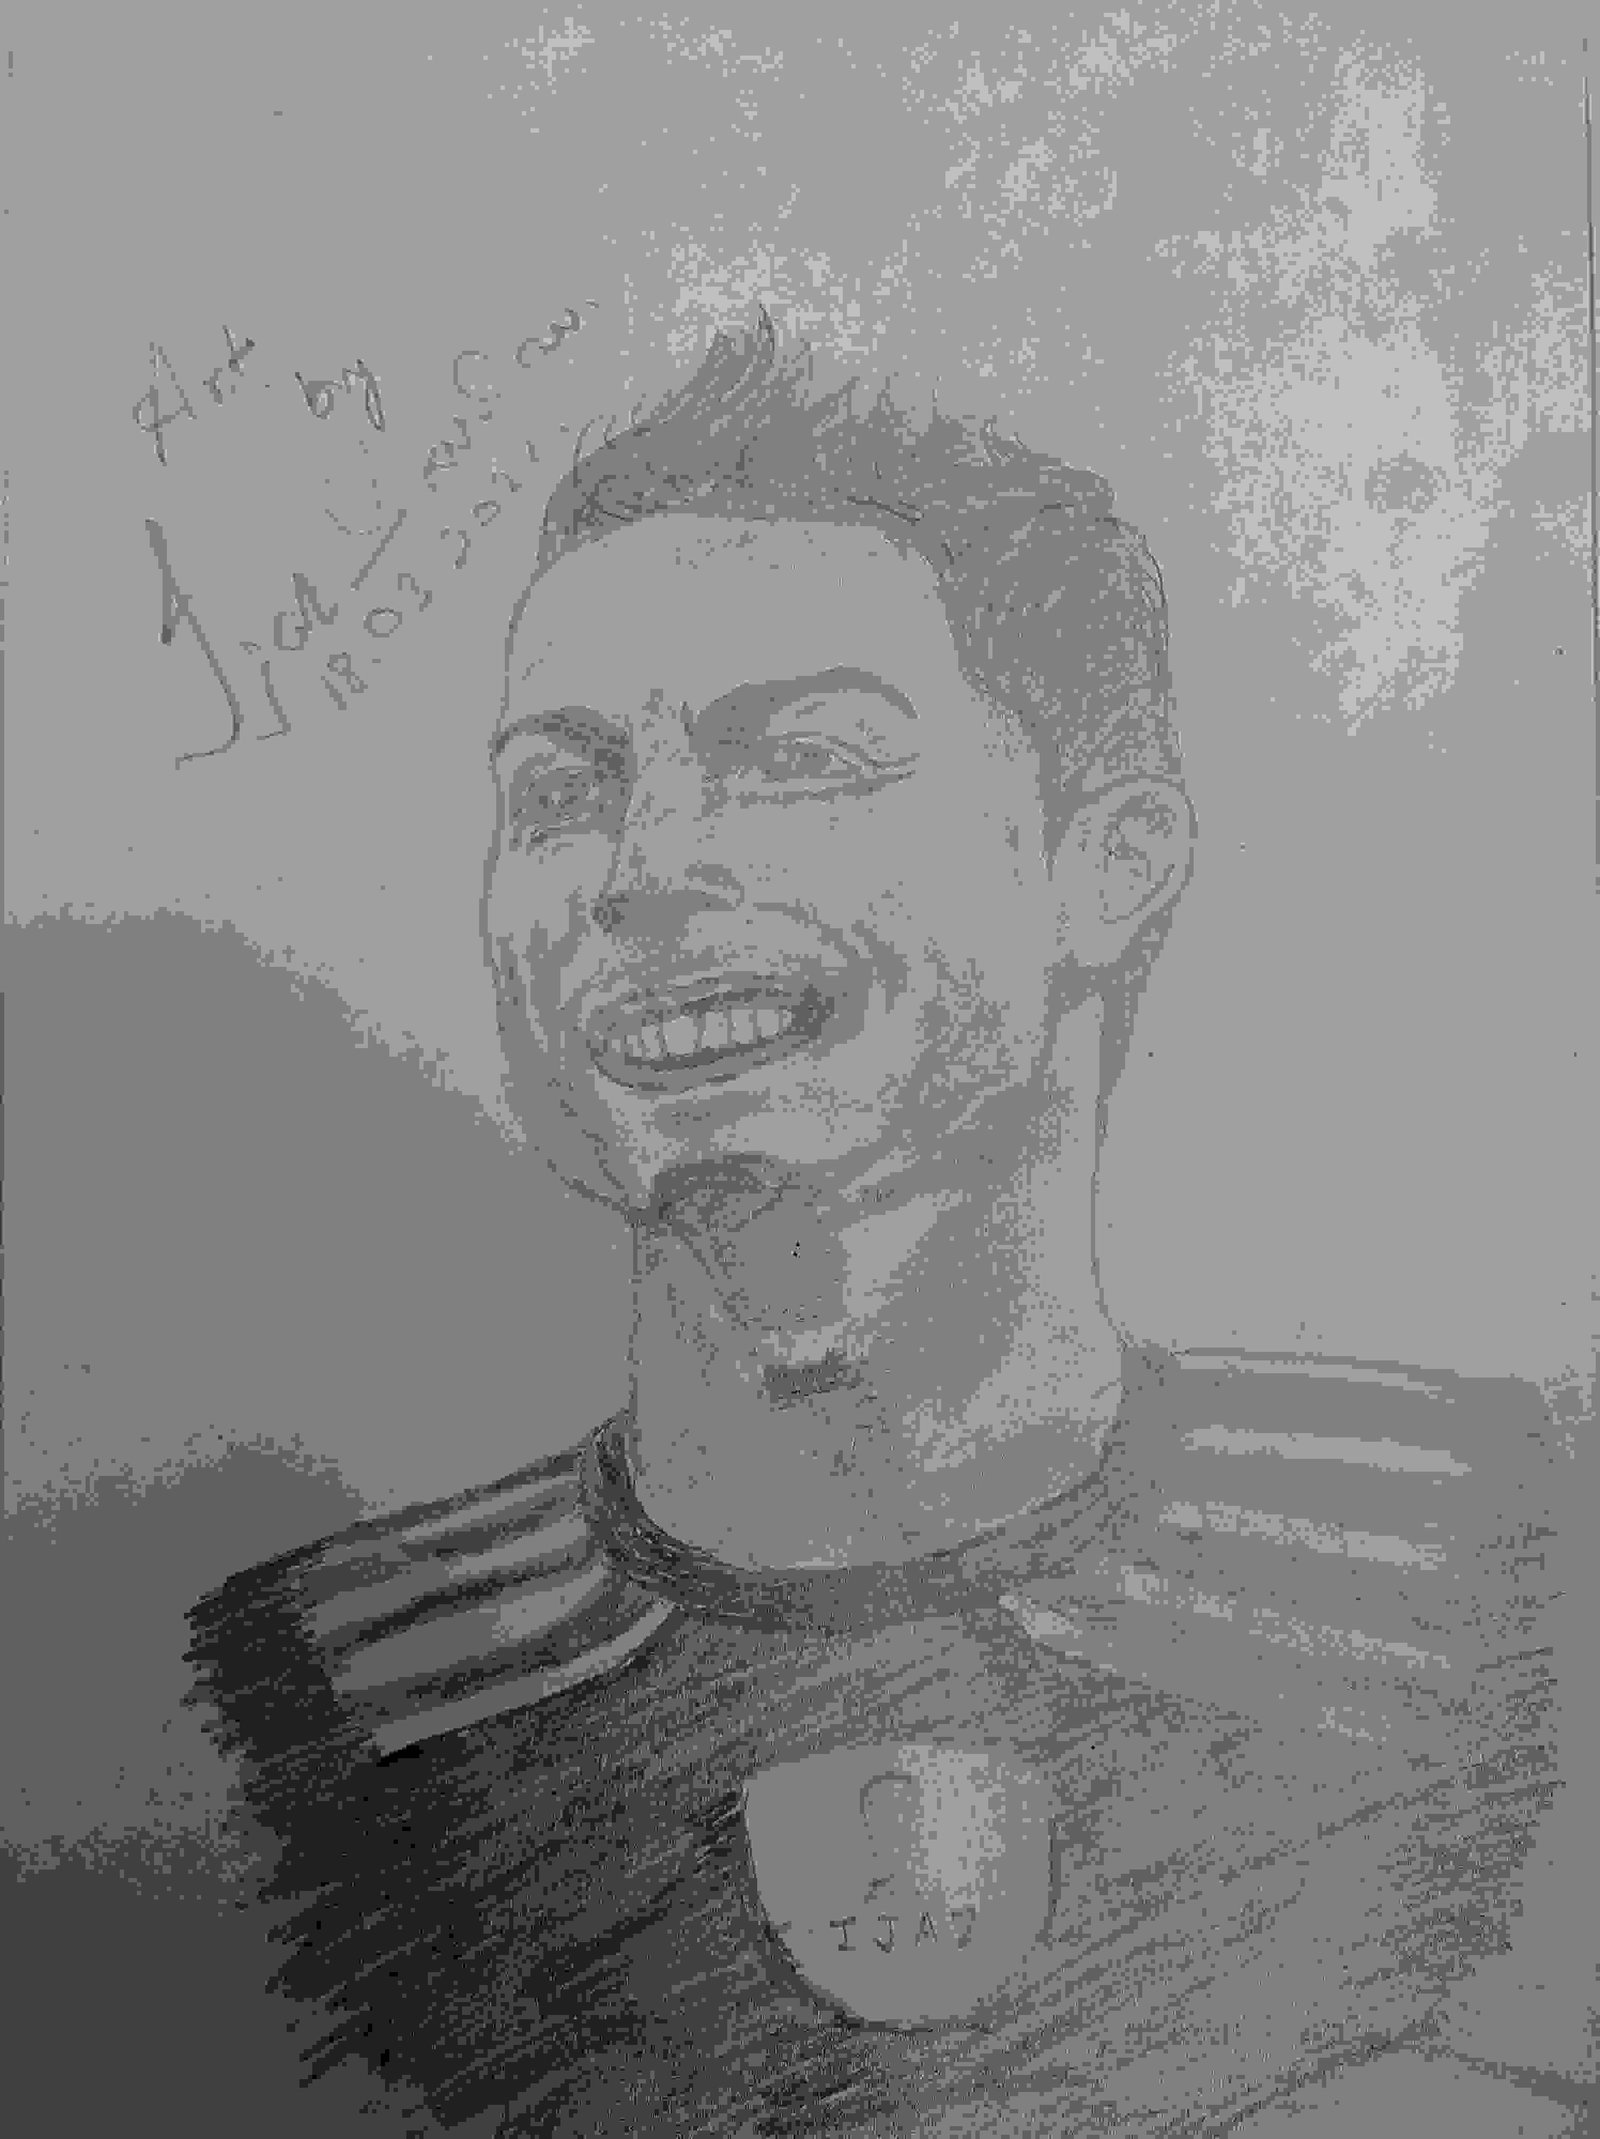 Bishalart - Simple pencil sketch of CR7. The full name of CR7 is cristiano  Ronaldo .Cristiano Ronaldo, popularly known by his nickname 'CR7' is a  Portuguese professional football ... He is one